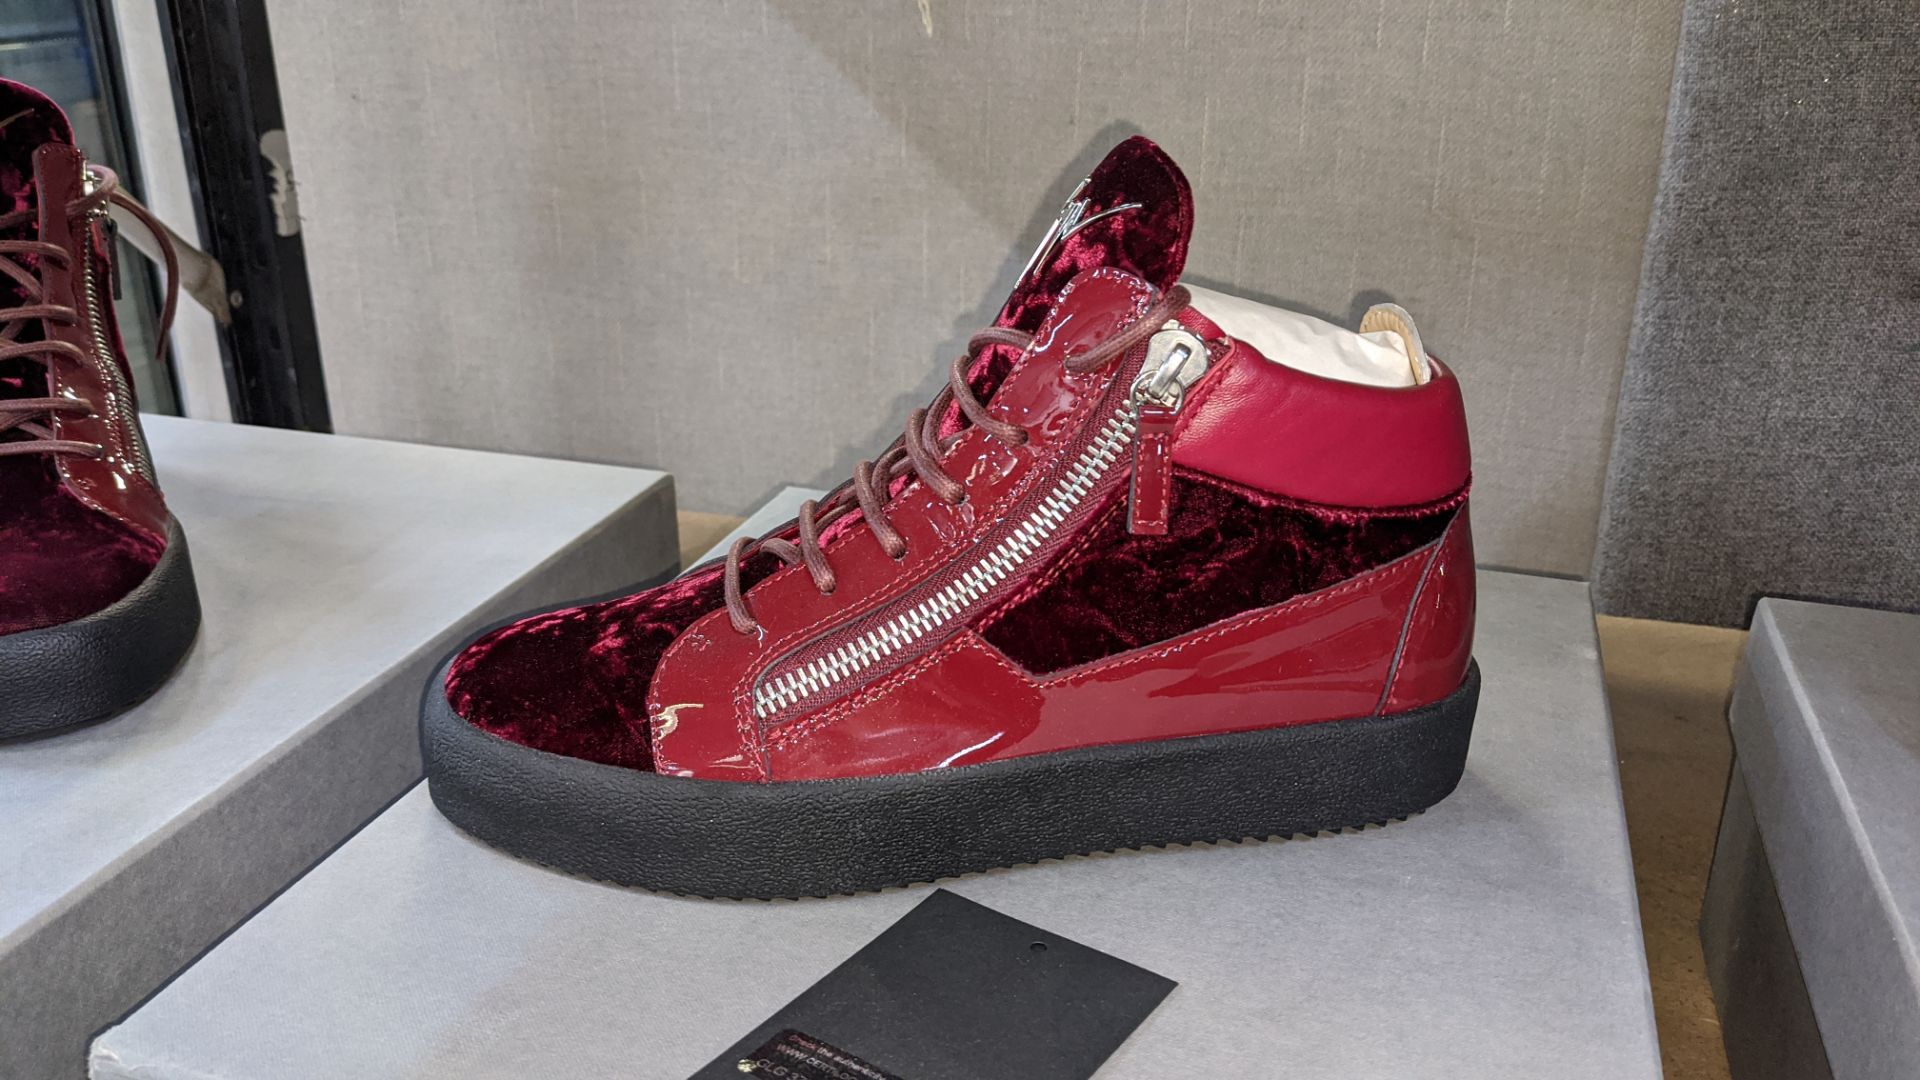 Pair of Giuseppe Zanotti High Top trainers, product code RU70010 colour Bordeaux (red) size EU41/ - Image 5 of 6